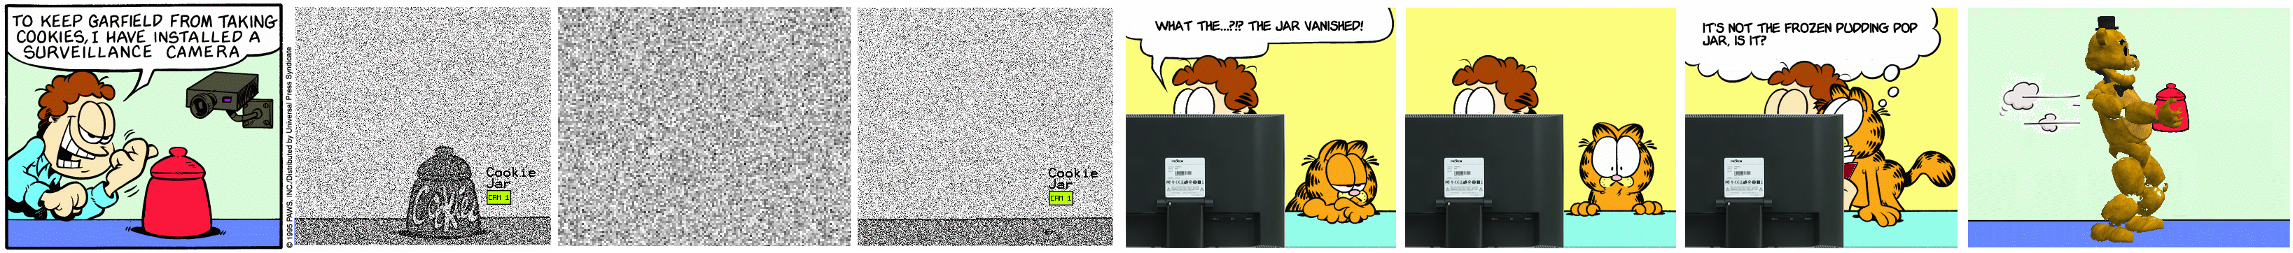 A Previous Strip Of Square Root of Minus Garfield, Slightly Enhanced